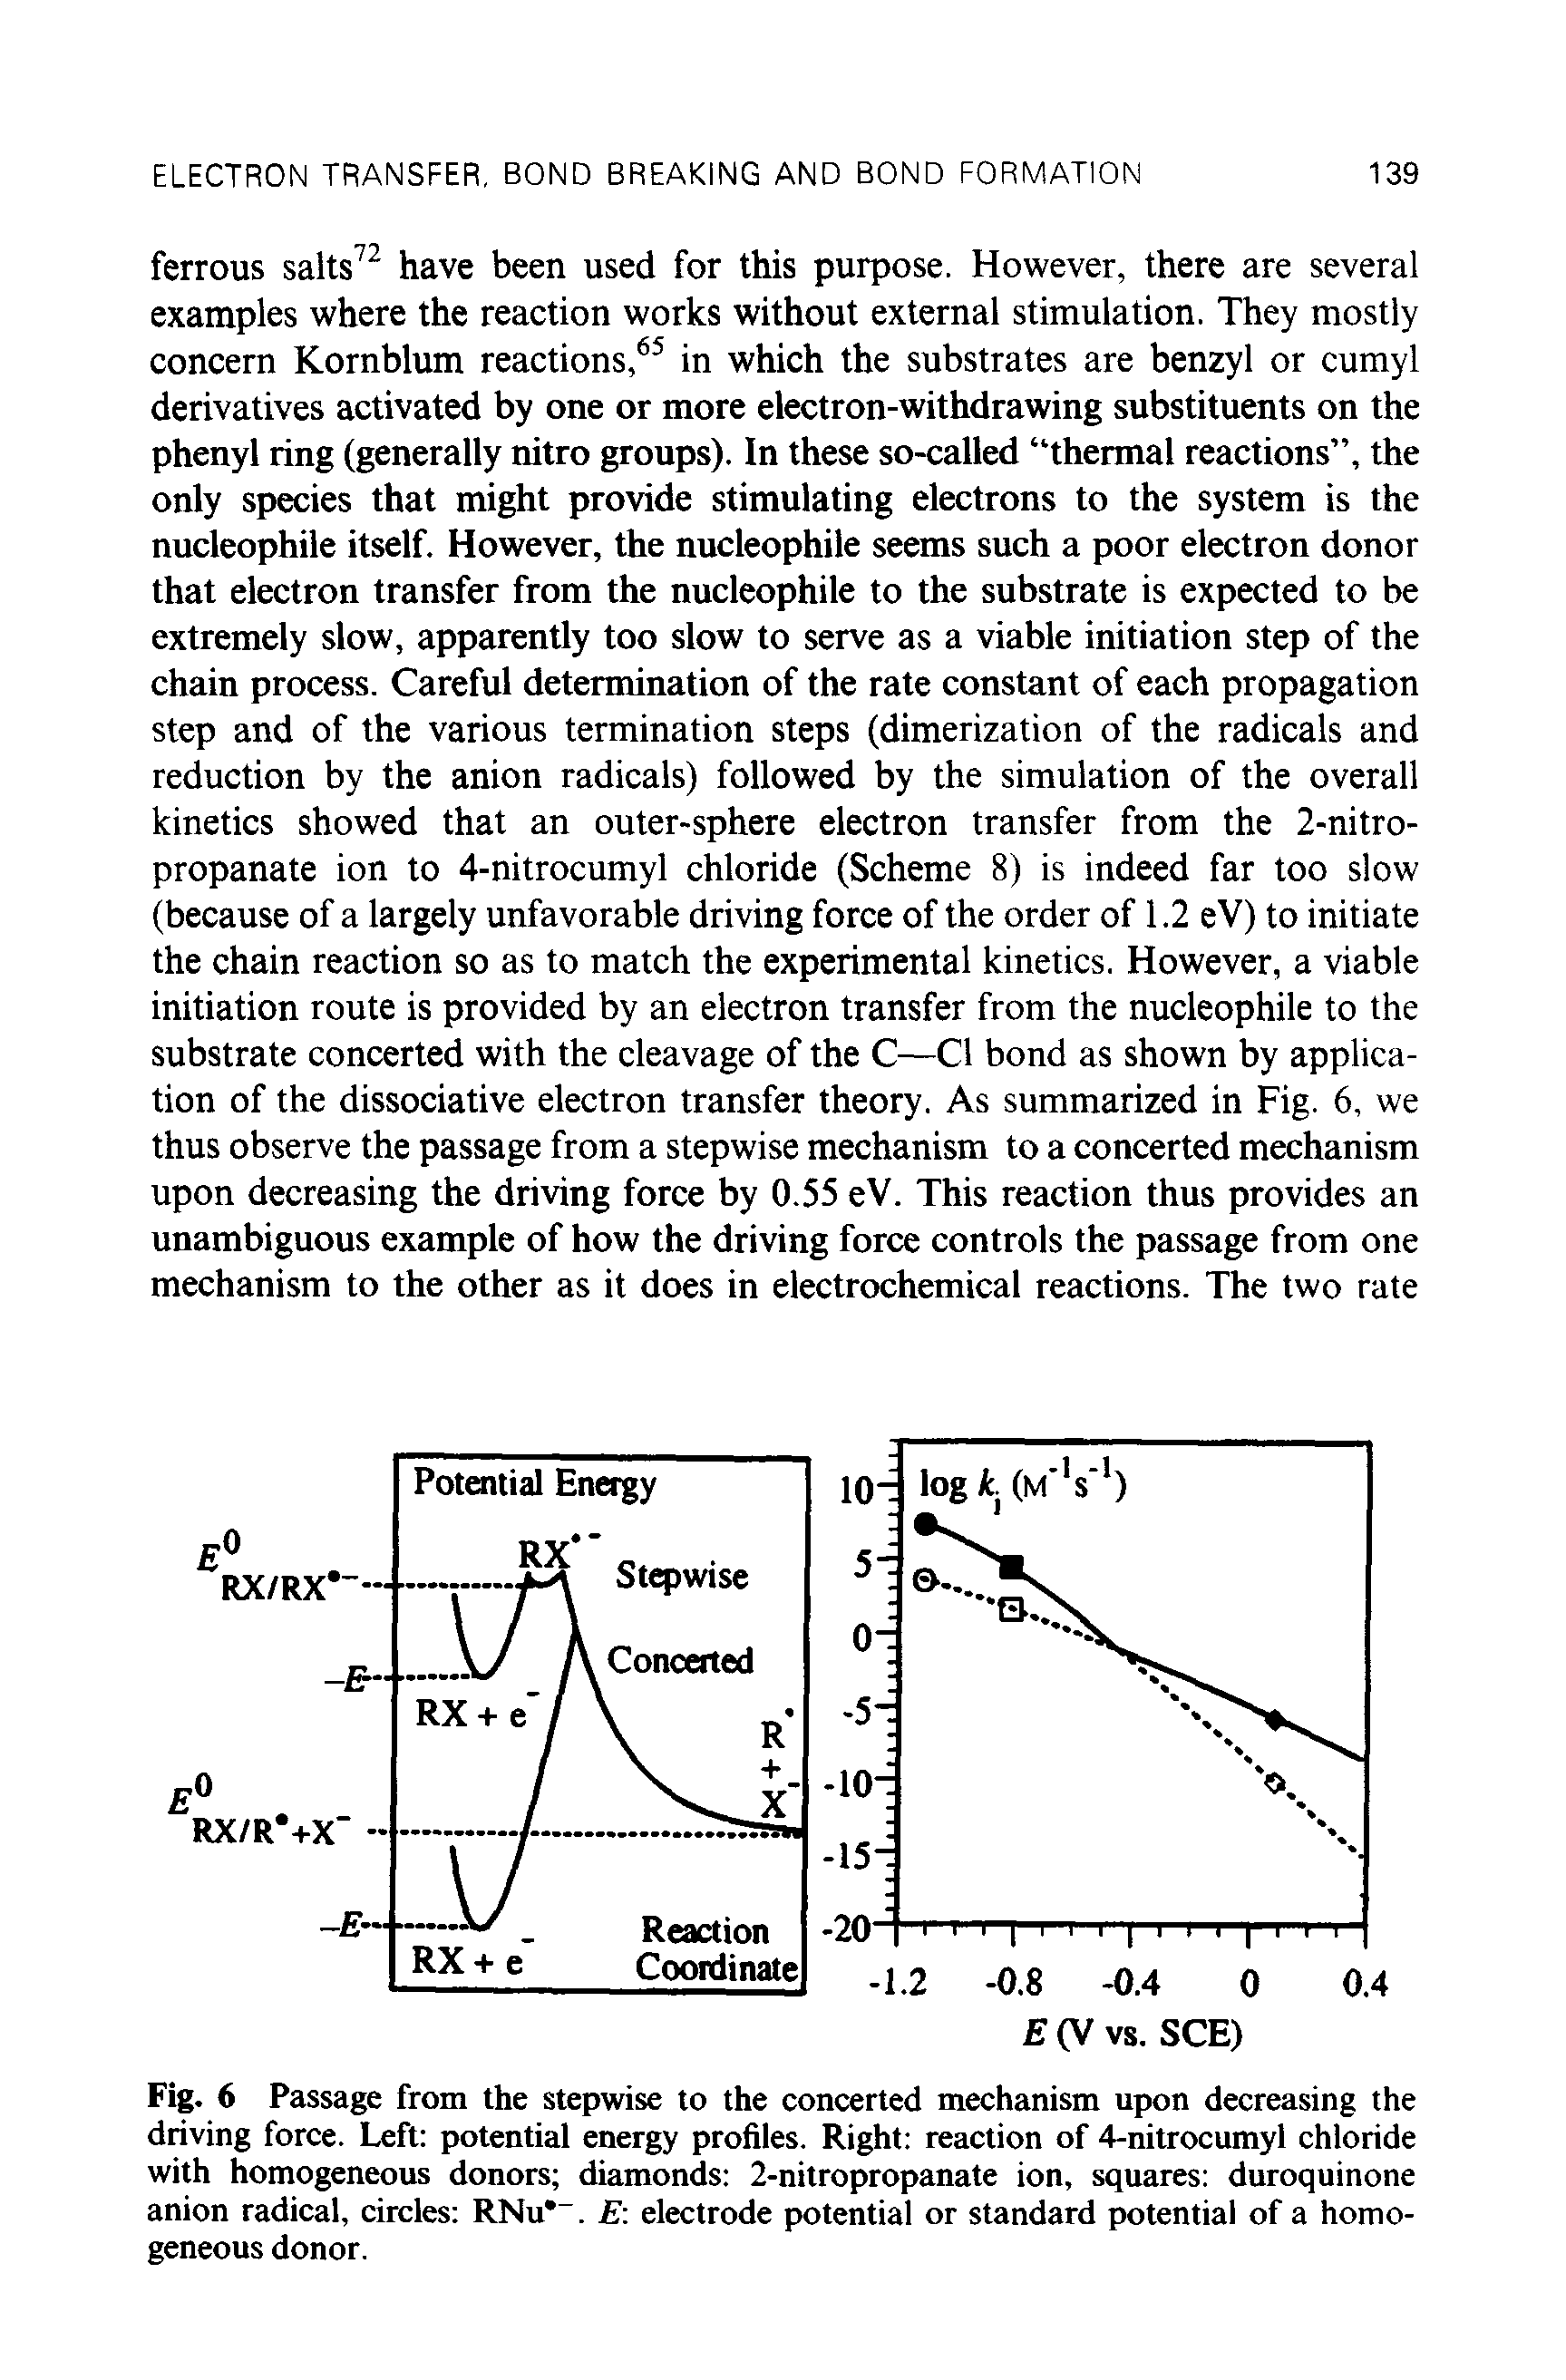 Fig. 6 Passage from the stepwise to the concerted mechanism upon decreasing the driving force. Left potential energy profiles. Right reaction of 4-nitrocumyl chloride with homogeneous donors diamonds 2-nitropropanate ion, squares duroquinone anion radical, circles RNu -. E electrode potential or standard potential of a homogeneous donor.